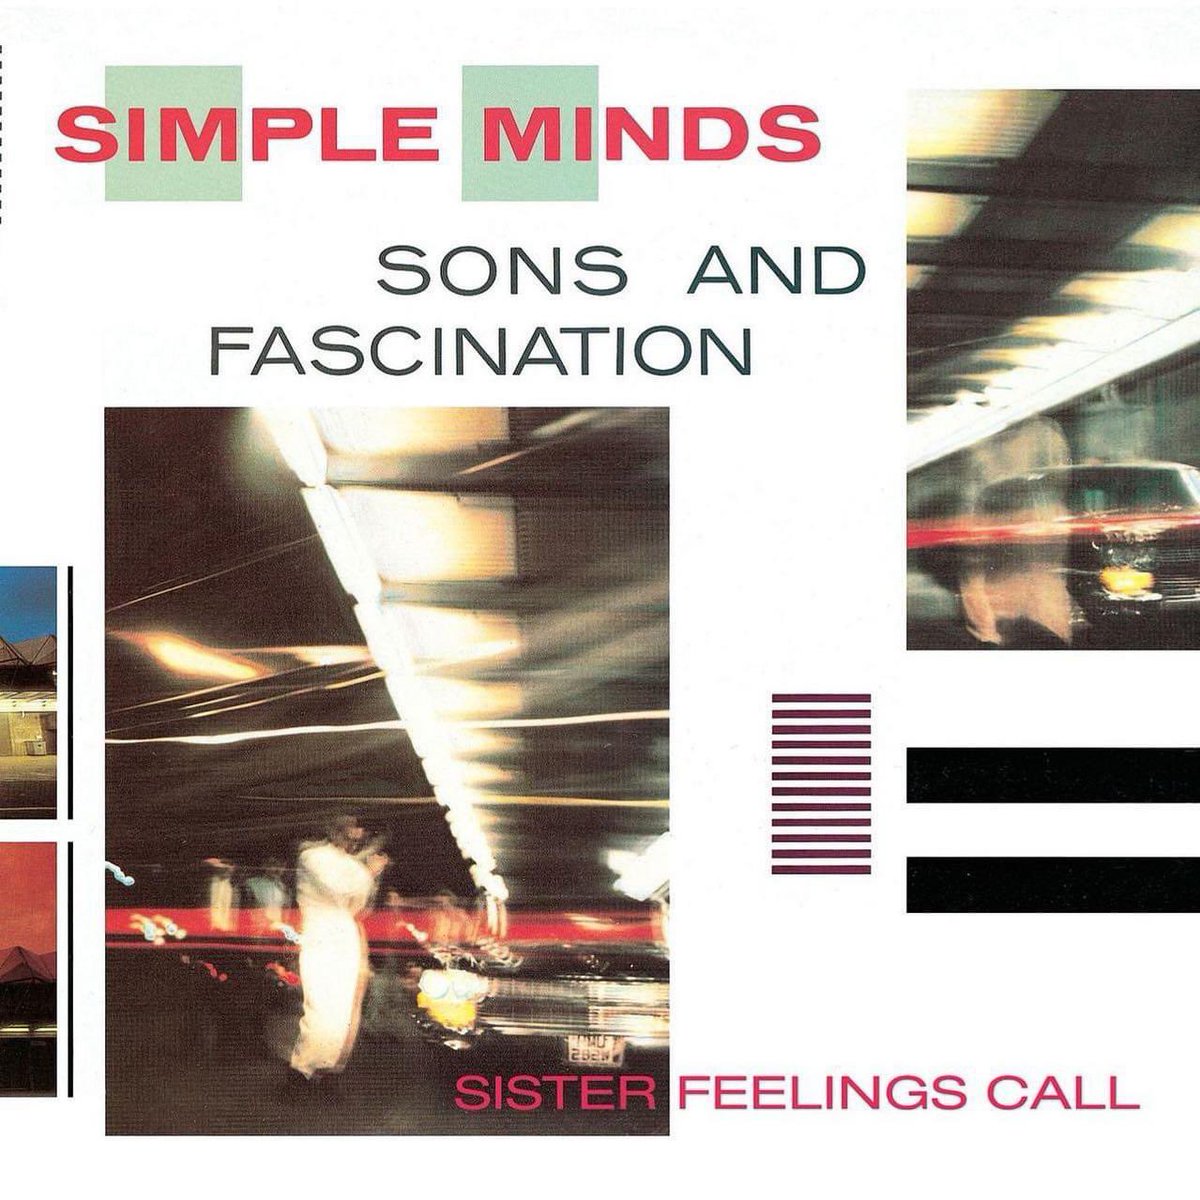 Happy anniversary to Simple Minds album, ‘Sons And Fascination/Sister Feelings Call’. Released this week in 1981. #simpleminds #sonsandfascination #sisterfeelingscall #theamerican #lovesong #sweatinbullet